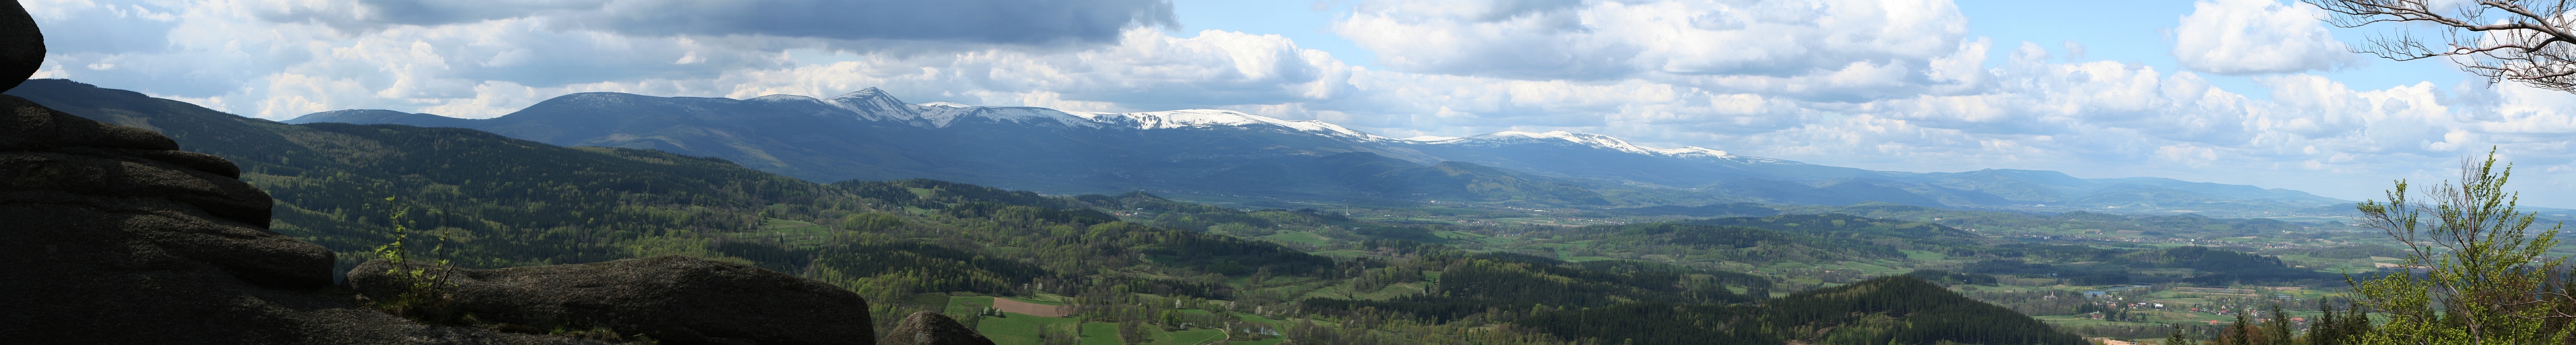 Panorama of the Karkonosze (Giant Mountains) and the Izera Mountains from the Rudawy Janowickie